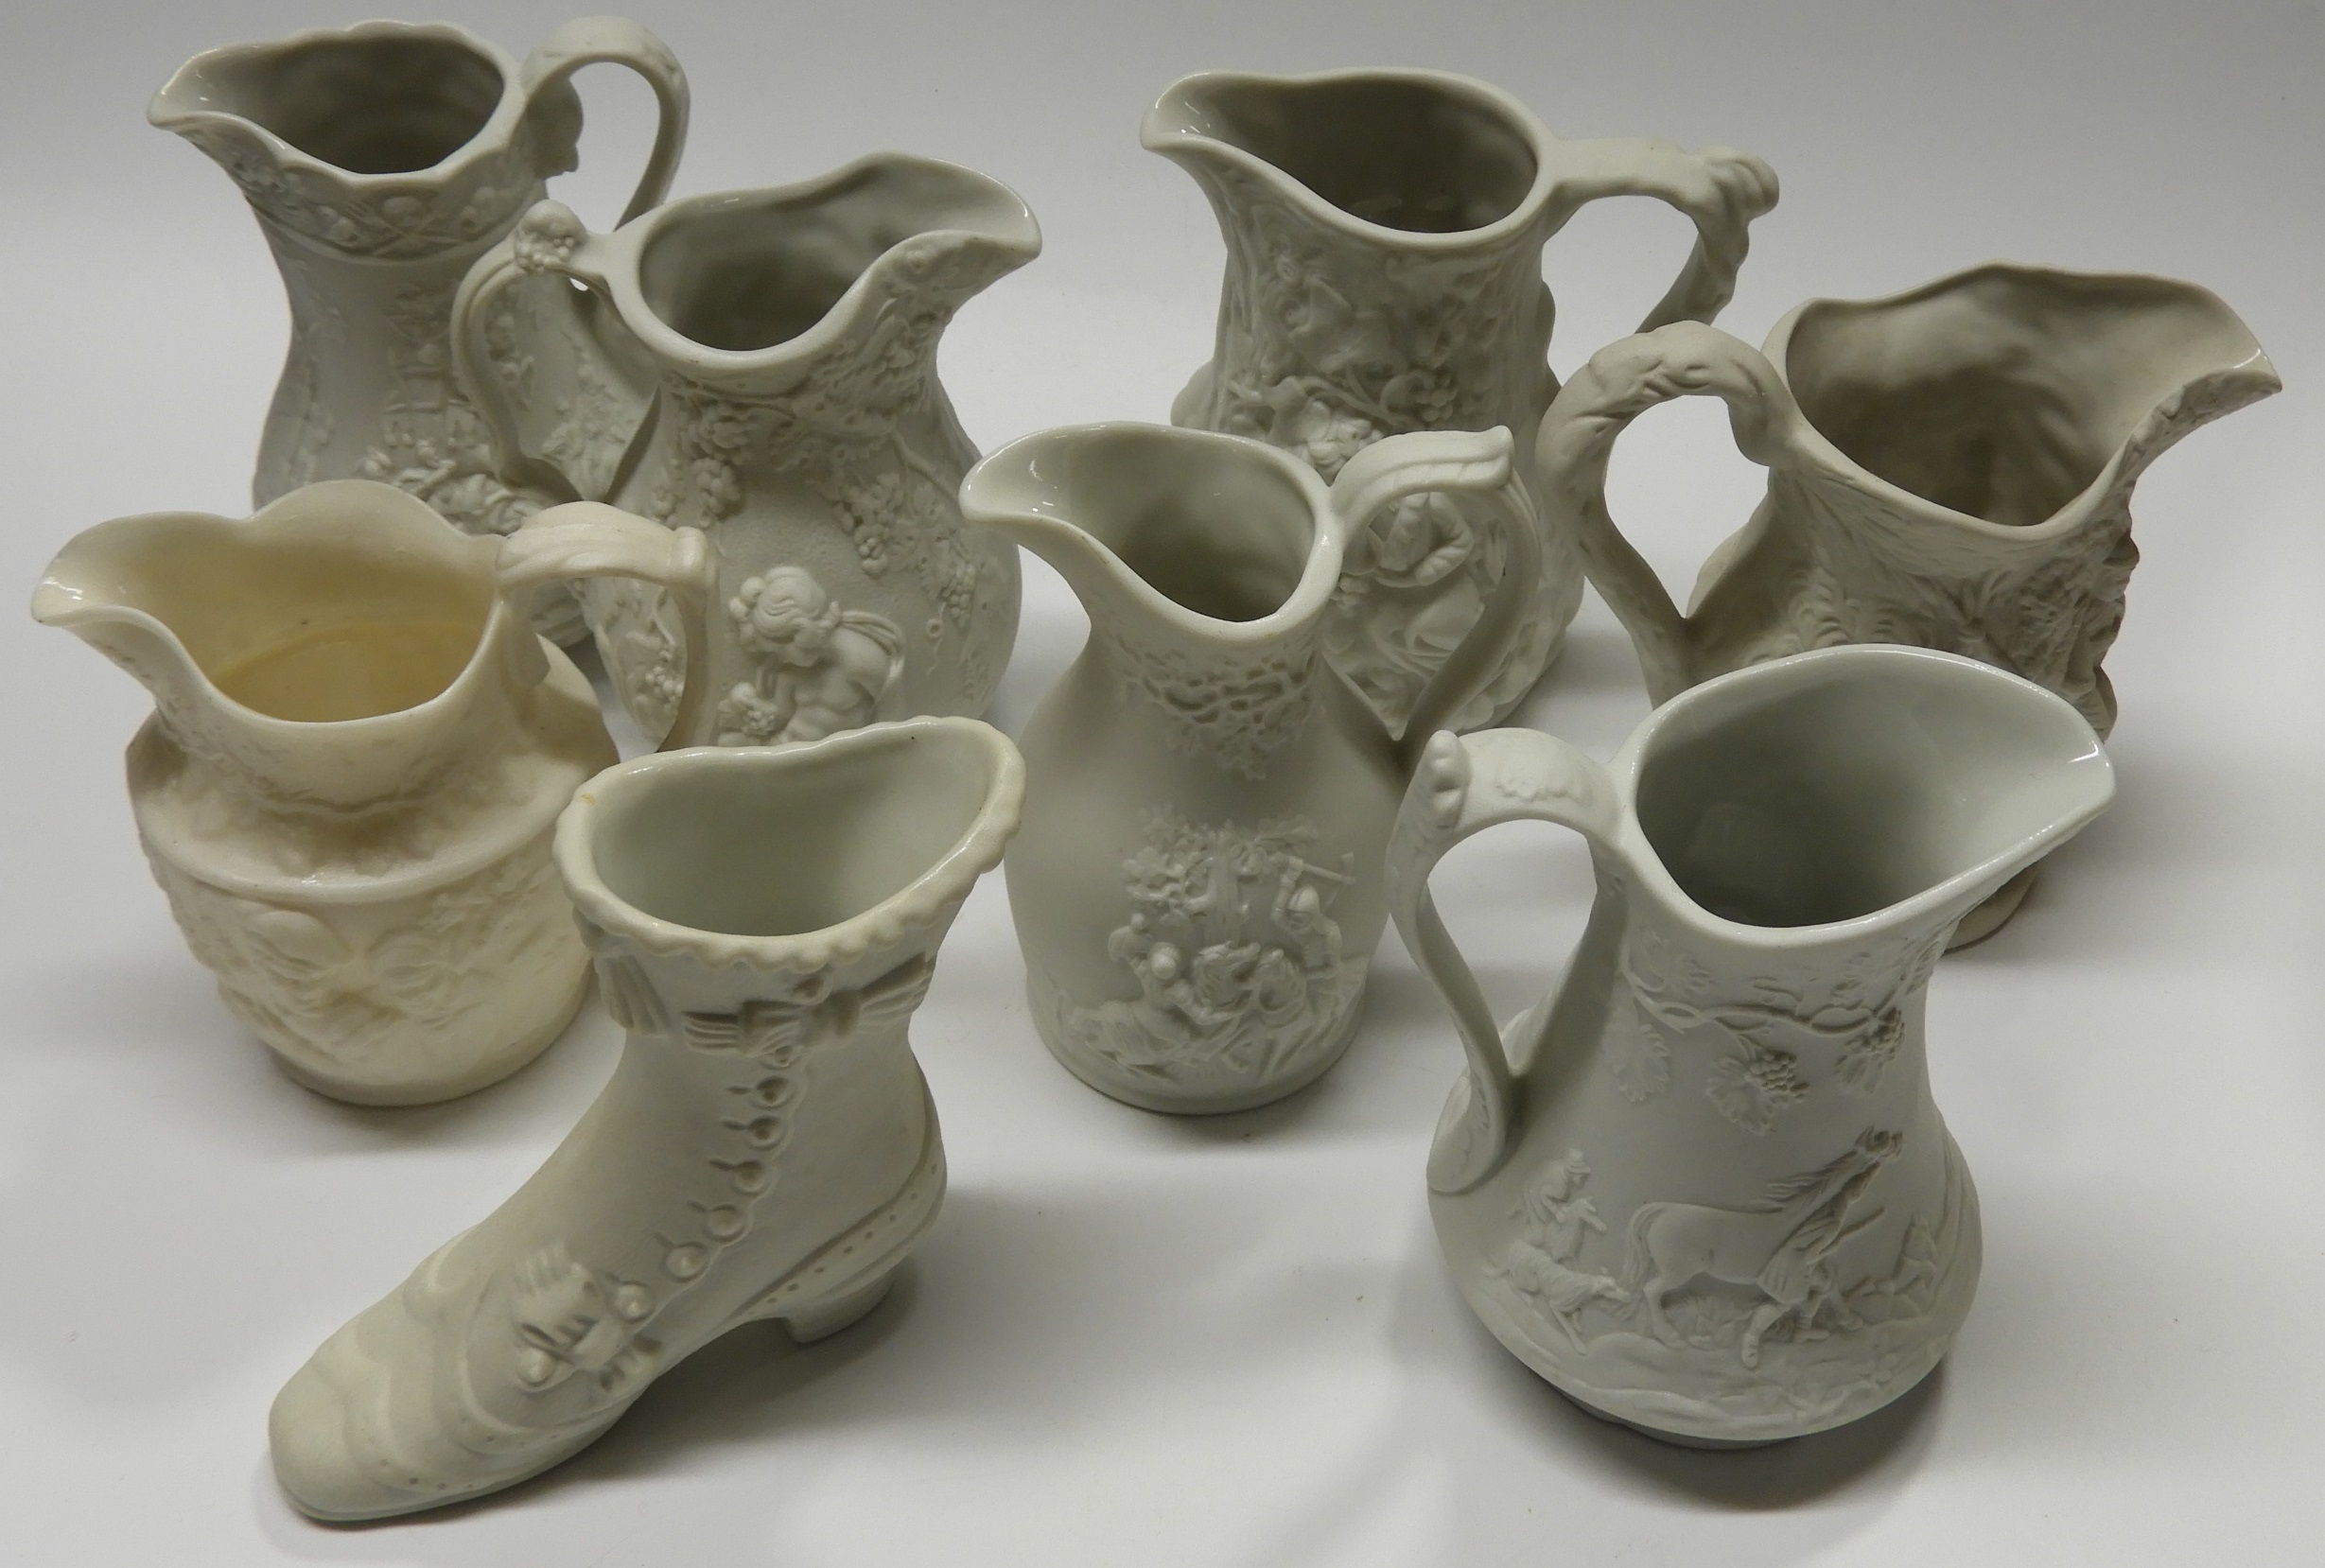 7 PORTMECRION PARIAN SMALL JUGS & A BOOT